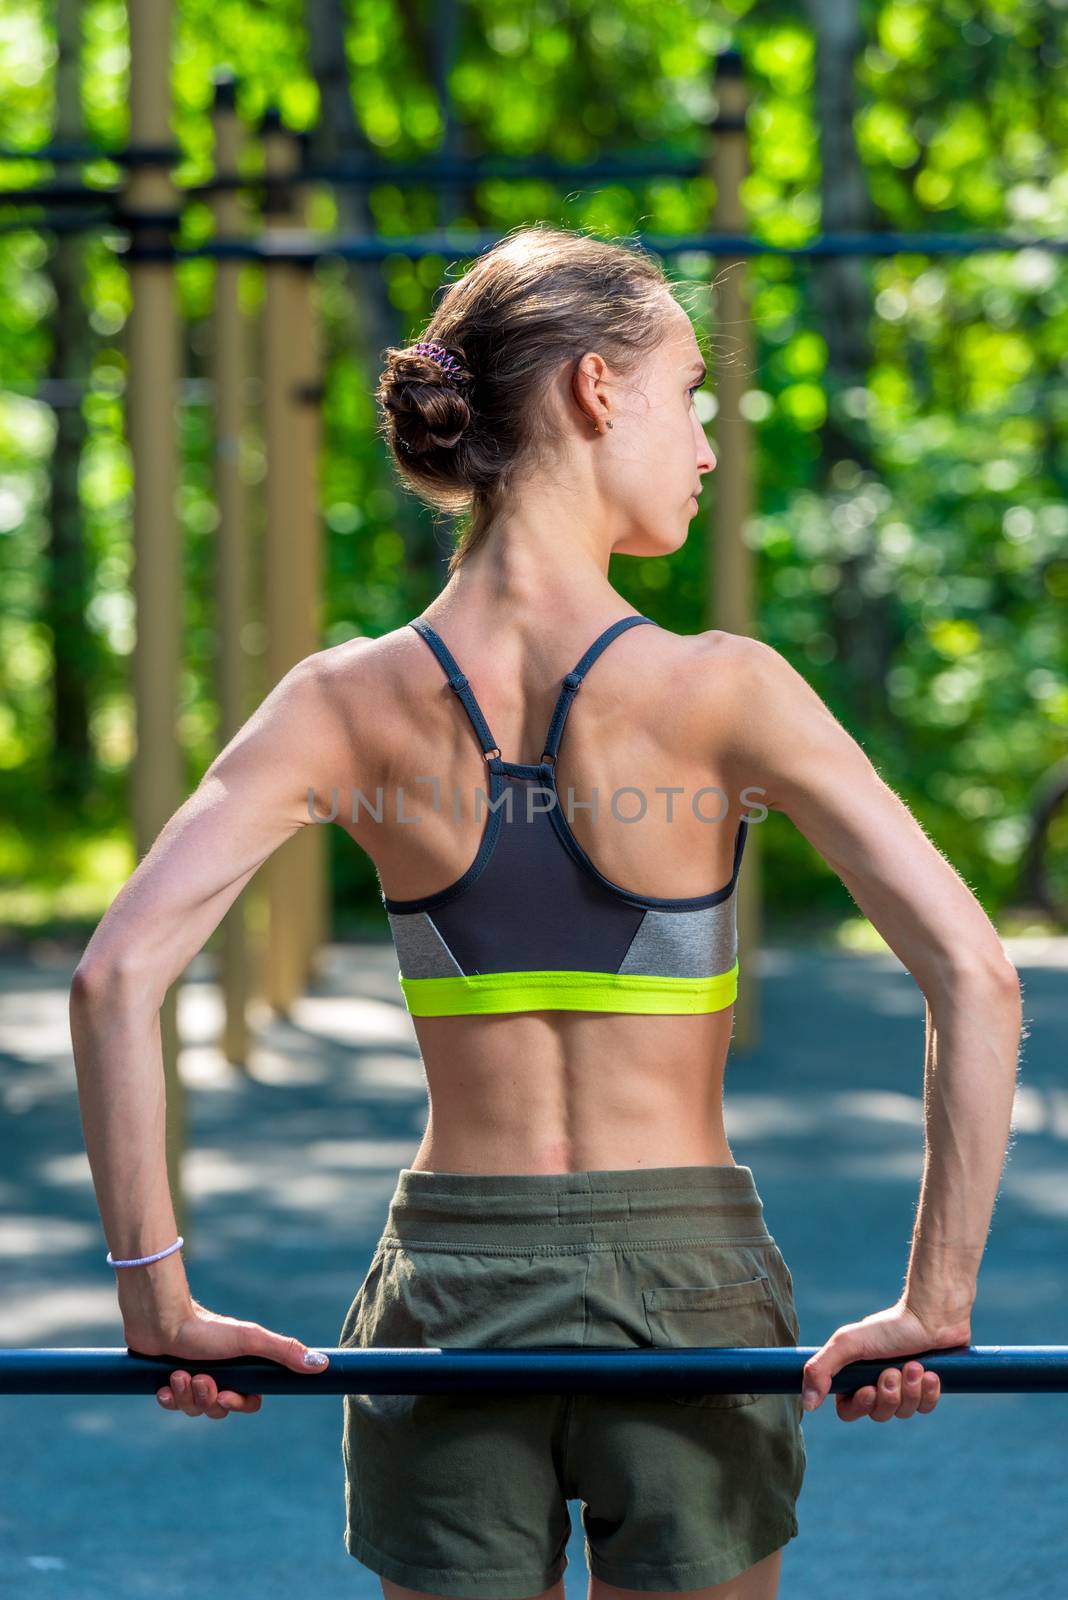 portrait from the back girl with a muscular figure, who is engaged on the playground outside in the park